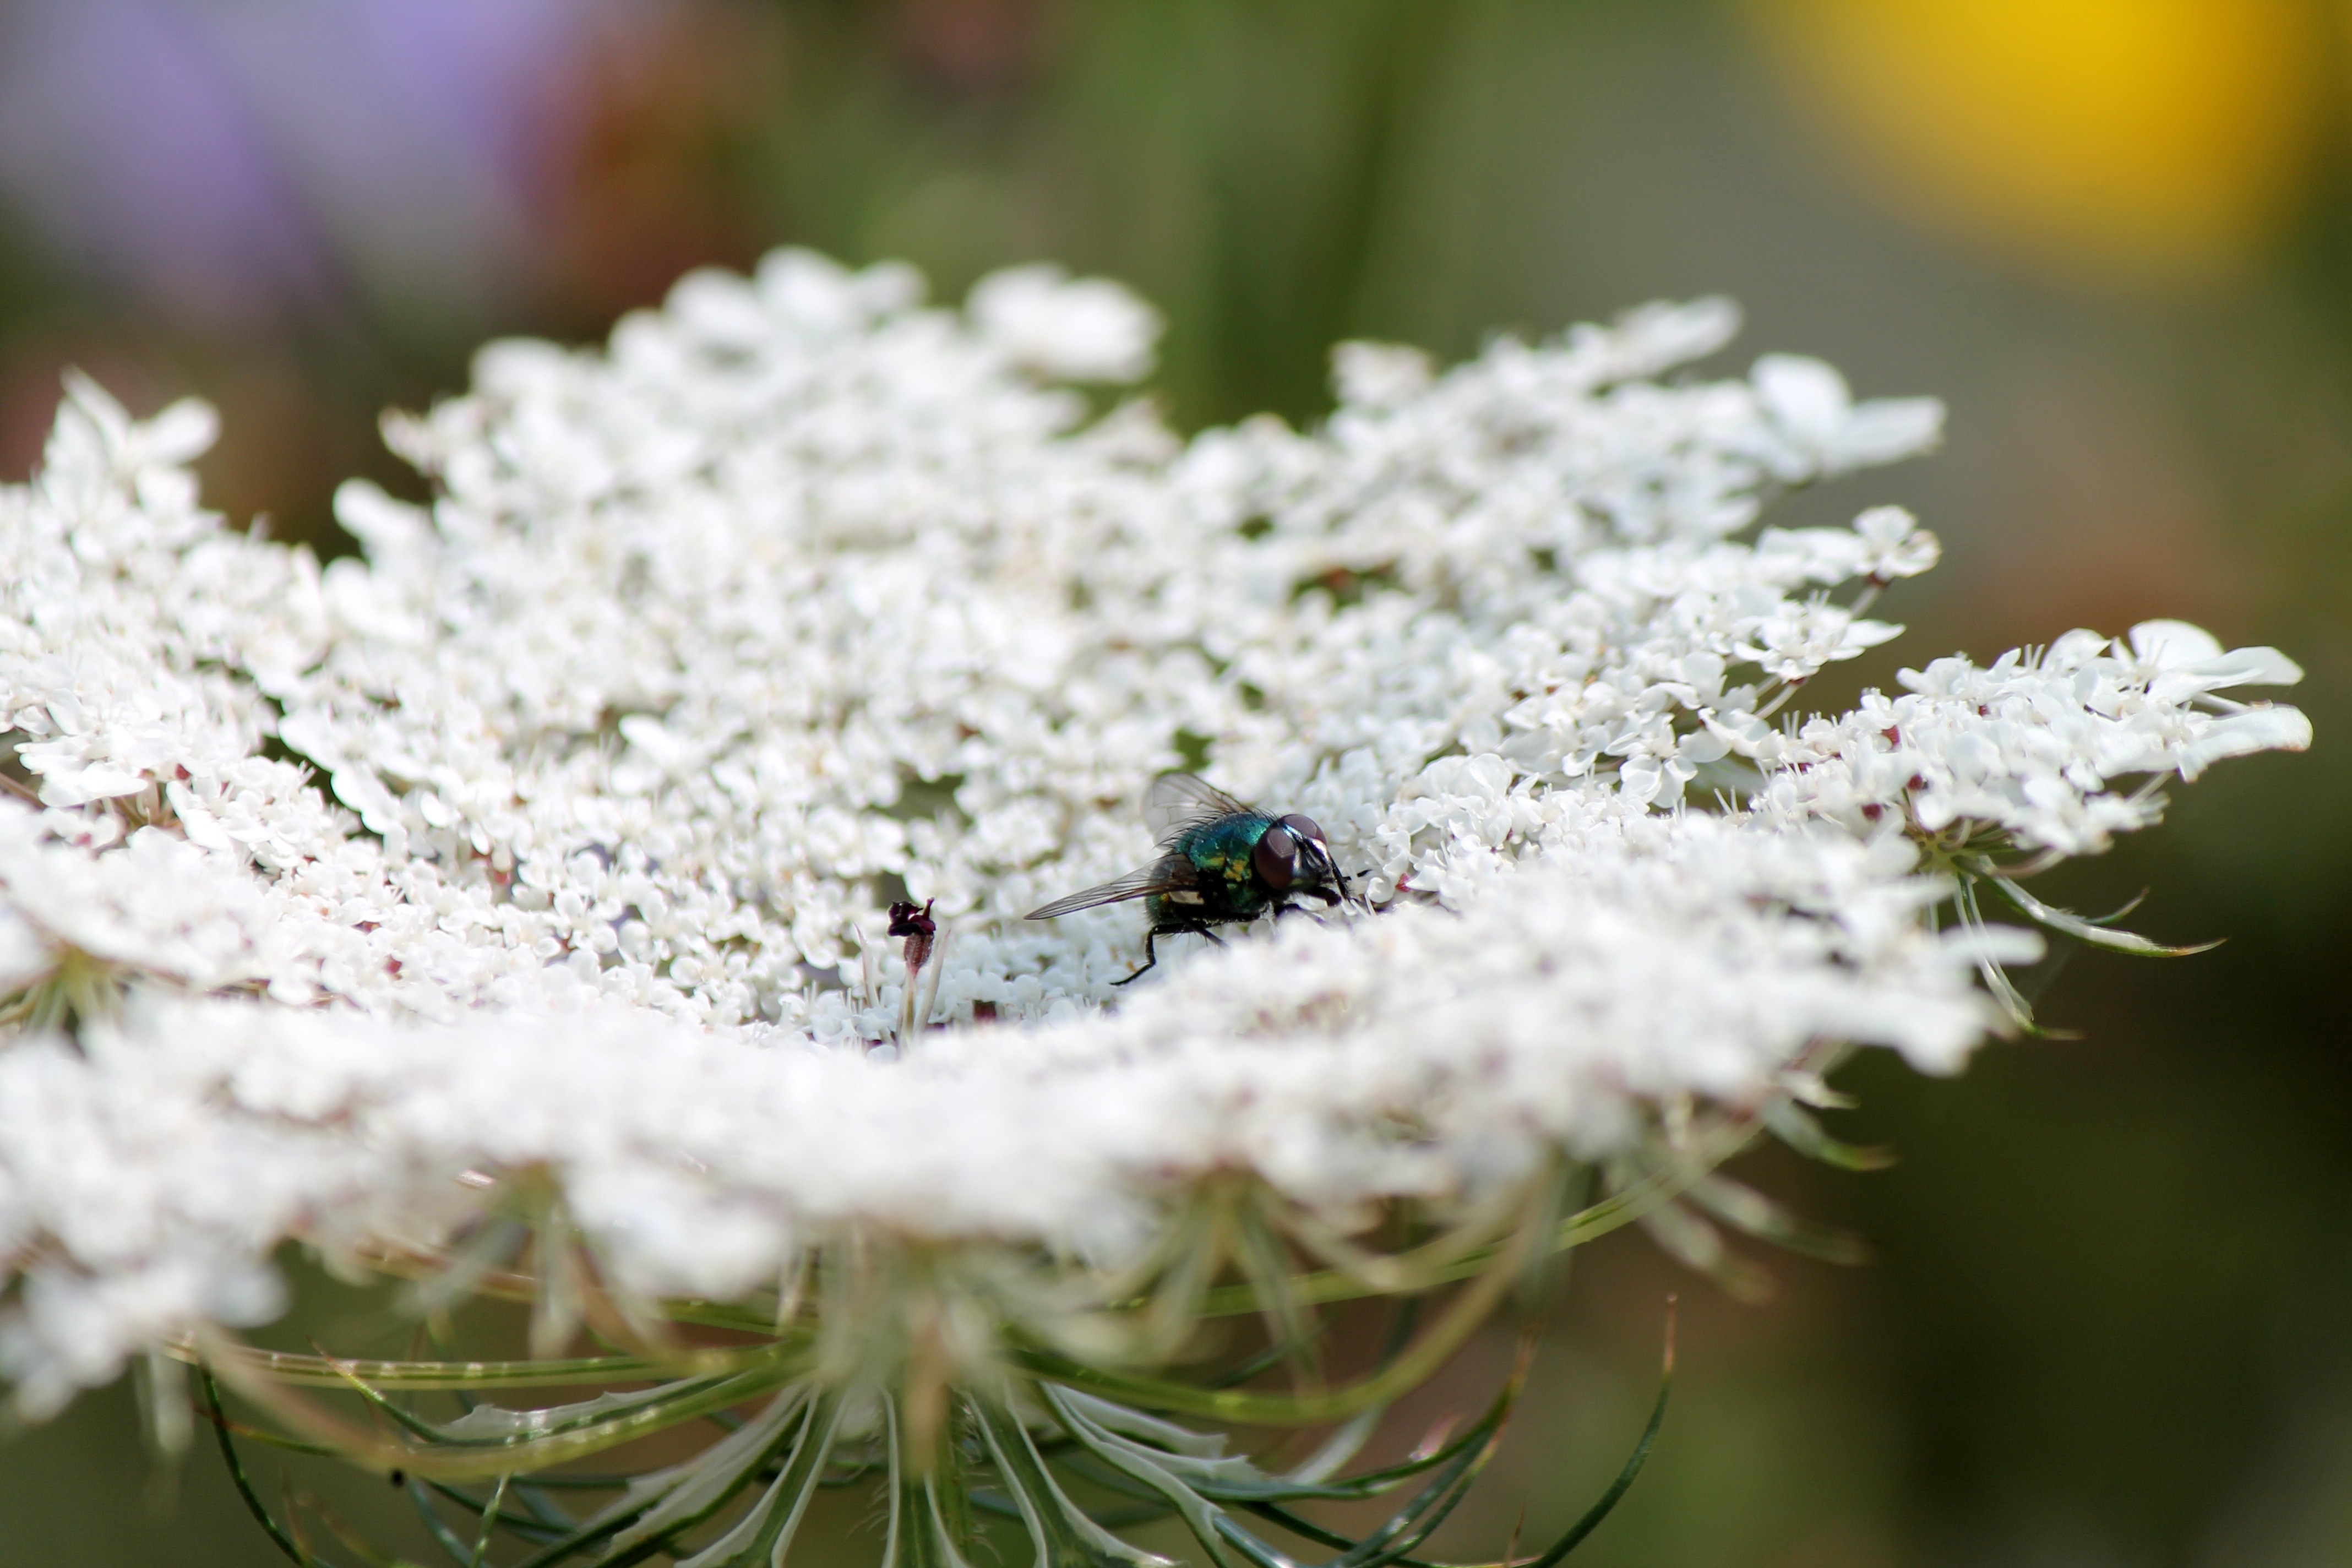 shallow focus photography of housefly on white flowers